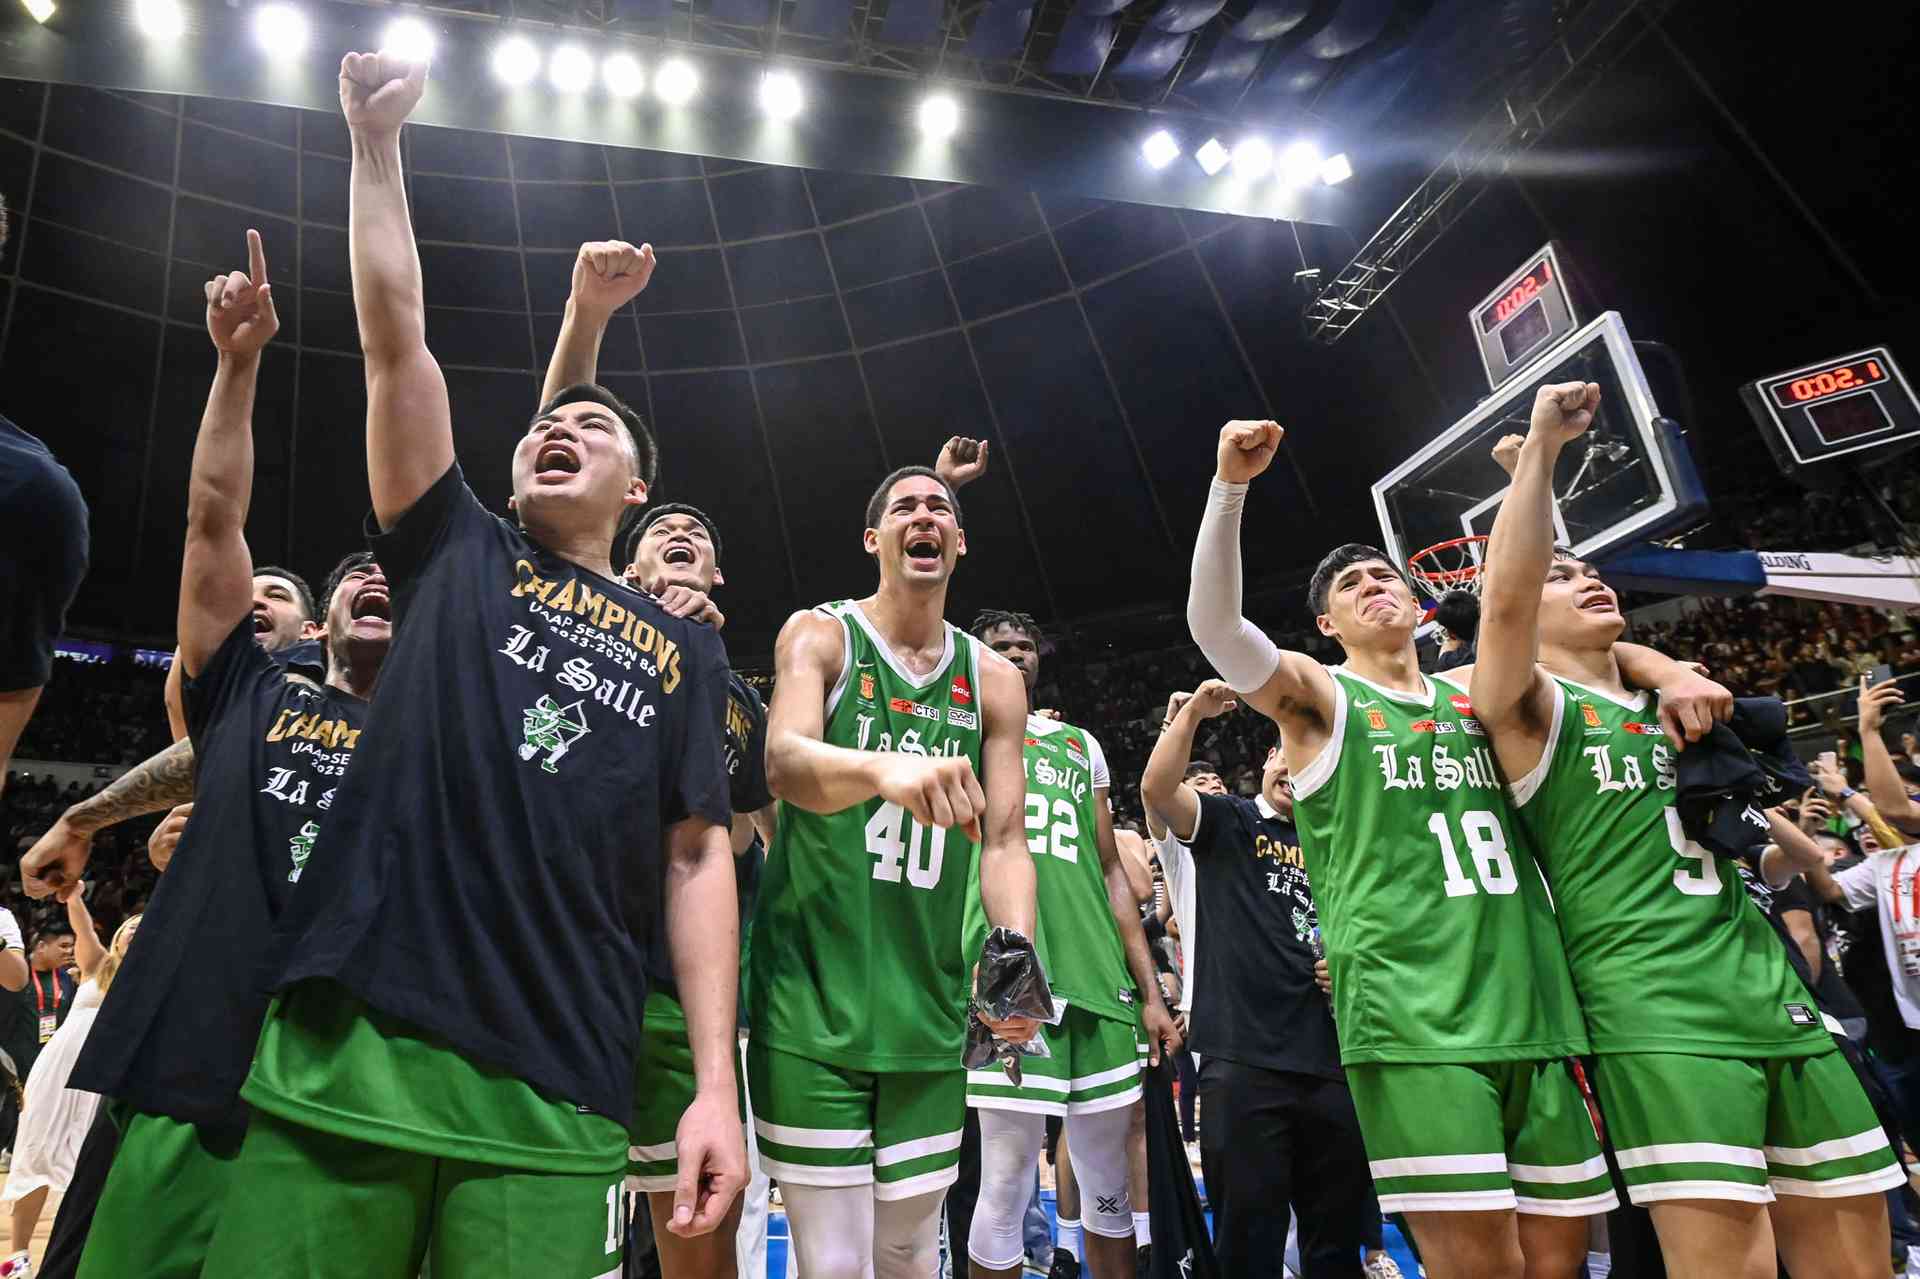 La Salle reclaims UAAP crown after seven years